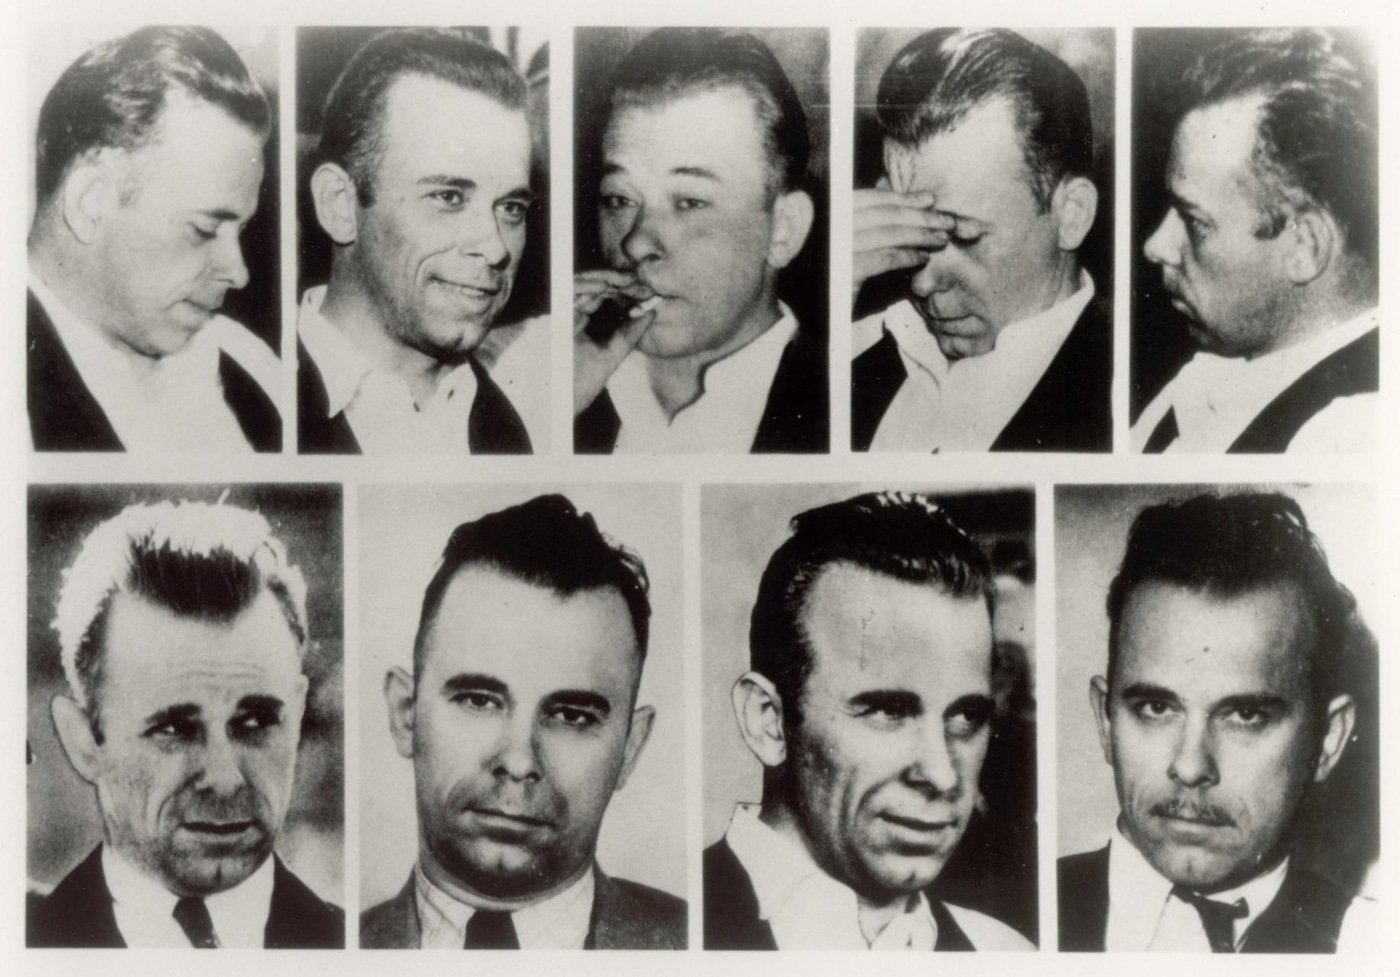 Nine images showing the face of John Dillinger as it changed over the years.